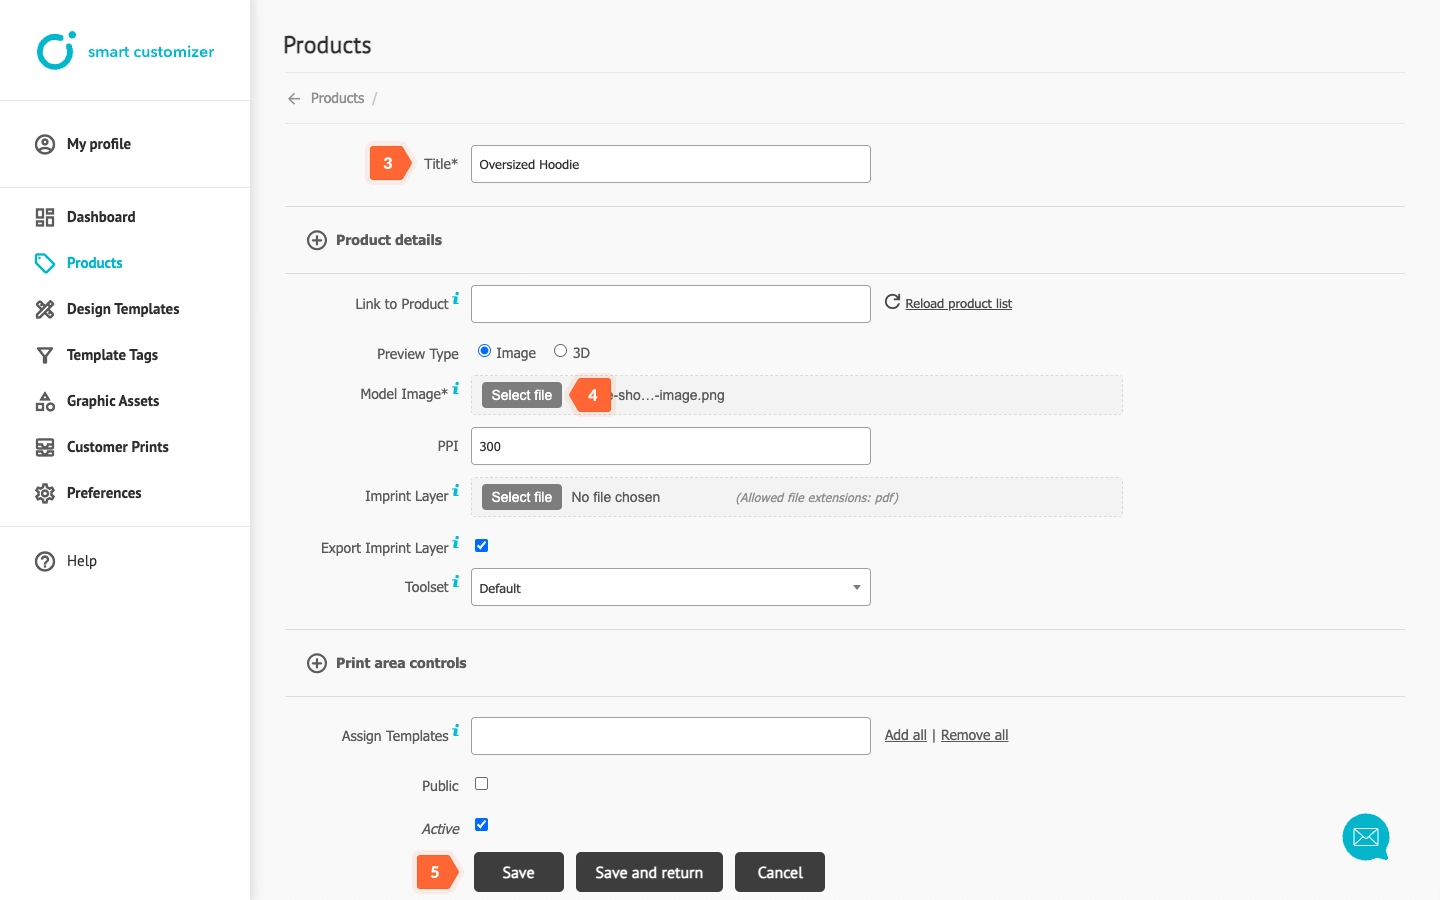 Add model image in your product settings